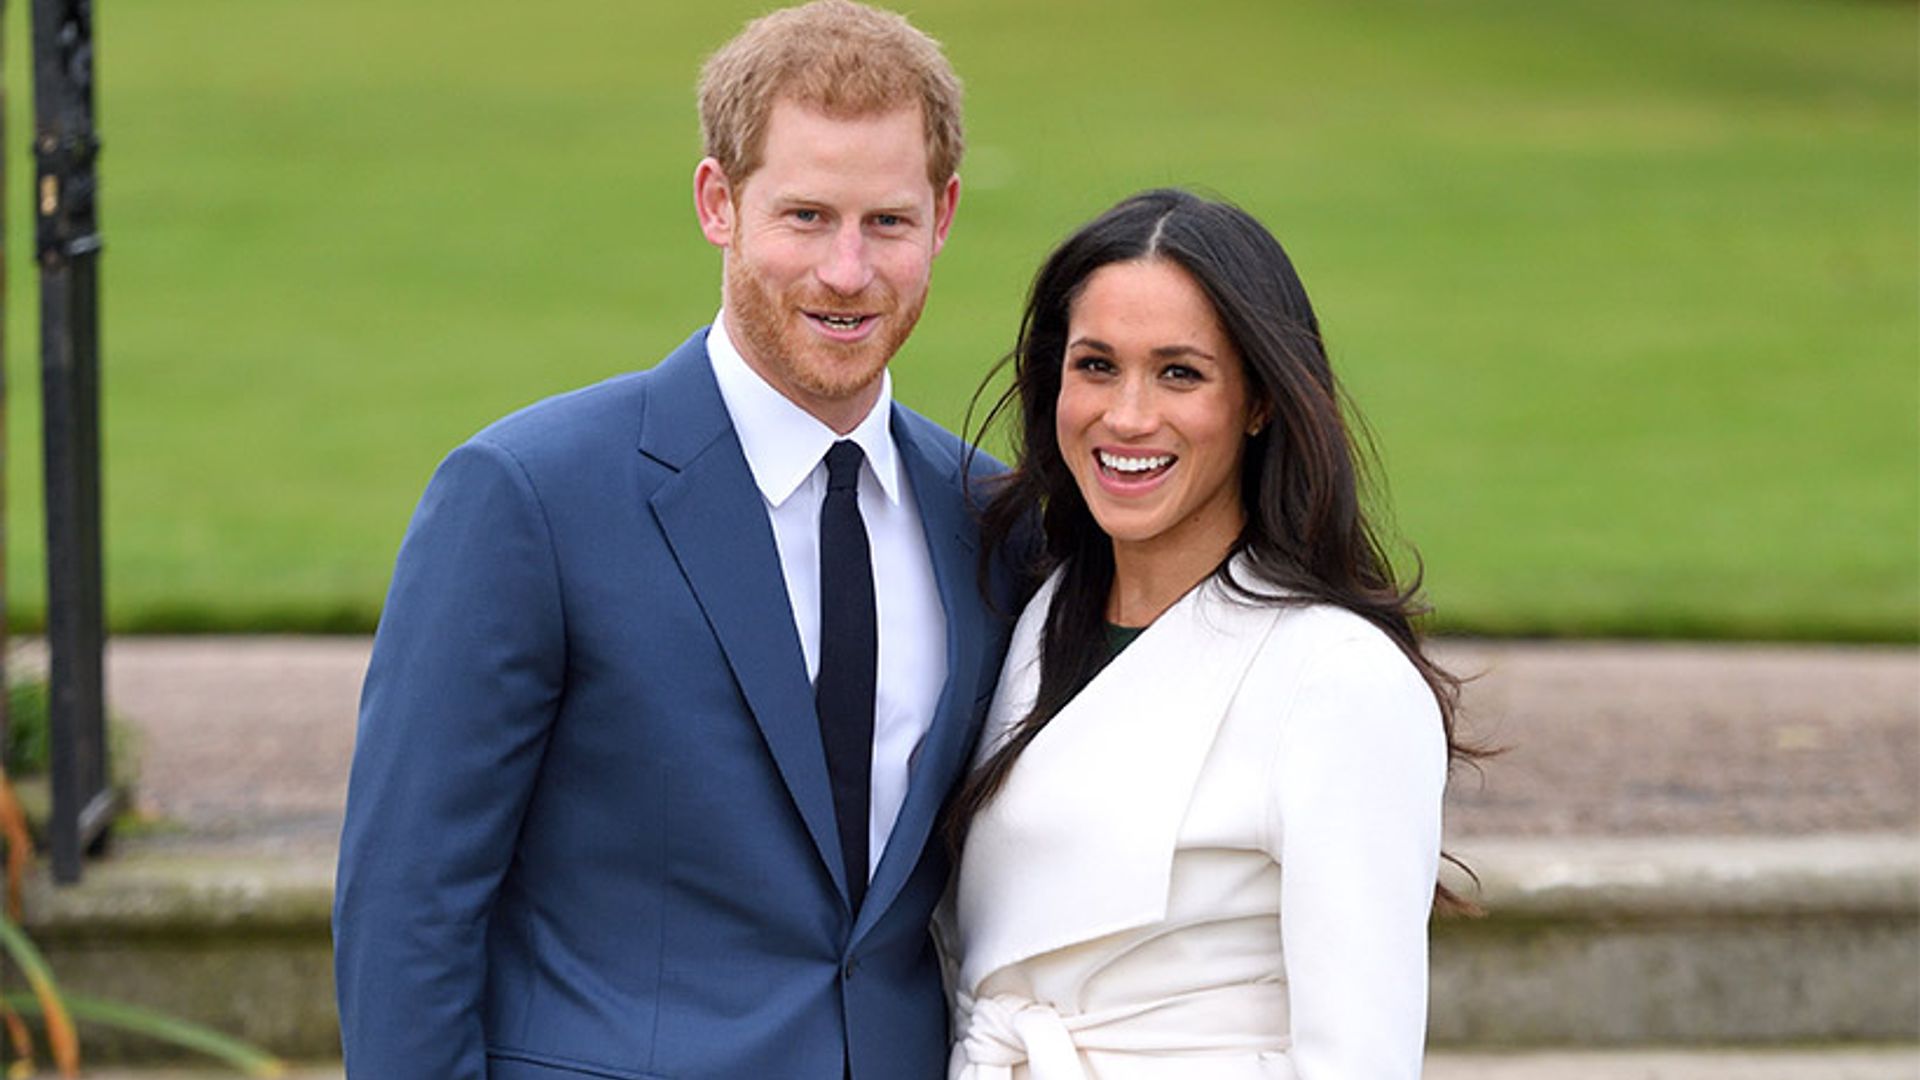 Guests Selling Gift Bags After Prince Harry, Meghan Markle Wedding